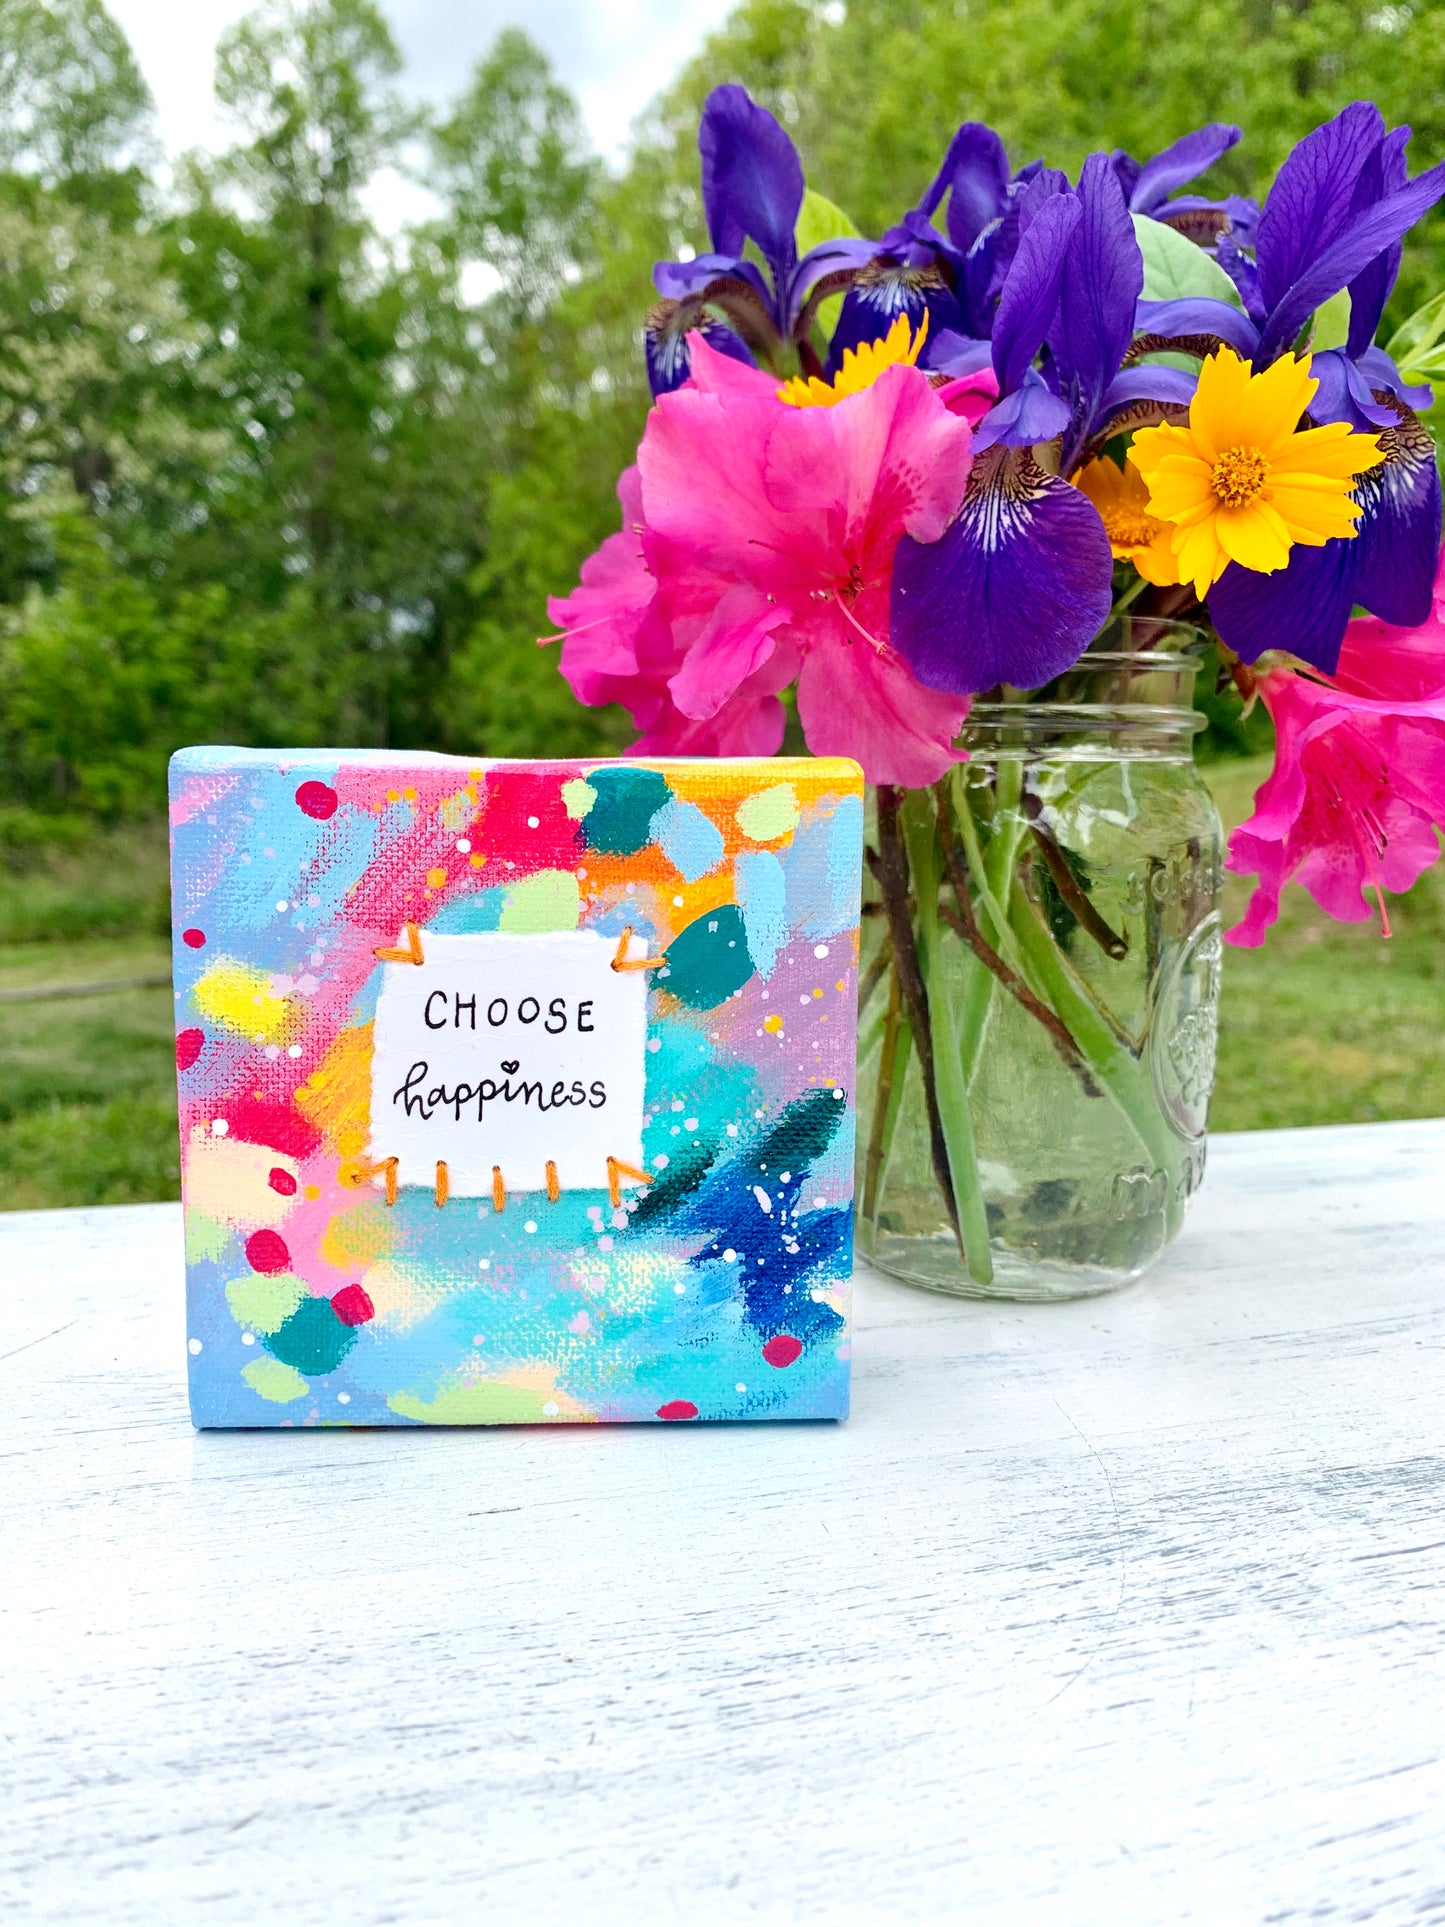 Choose Happiness 4x4 inch original abstract canvas with embroidery thread accents - Bethany Joy Art